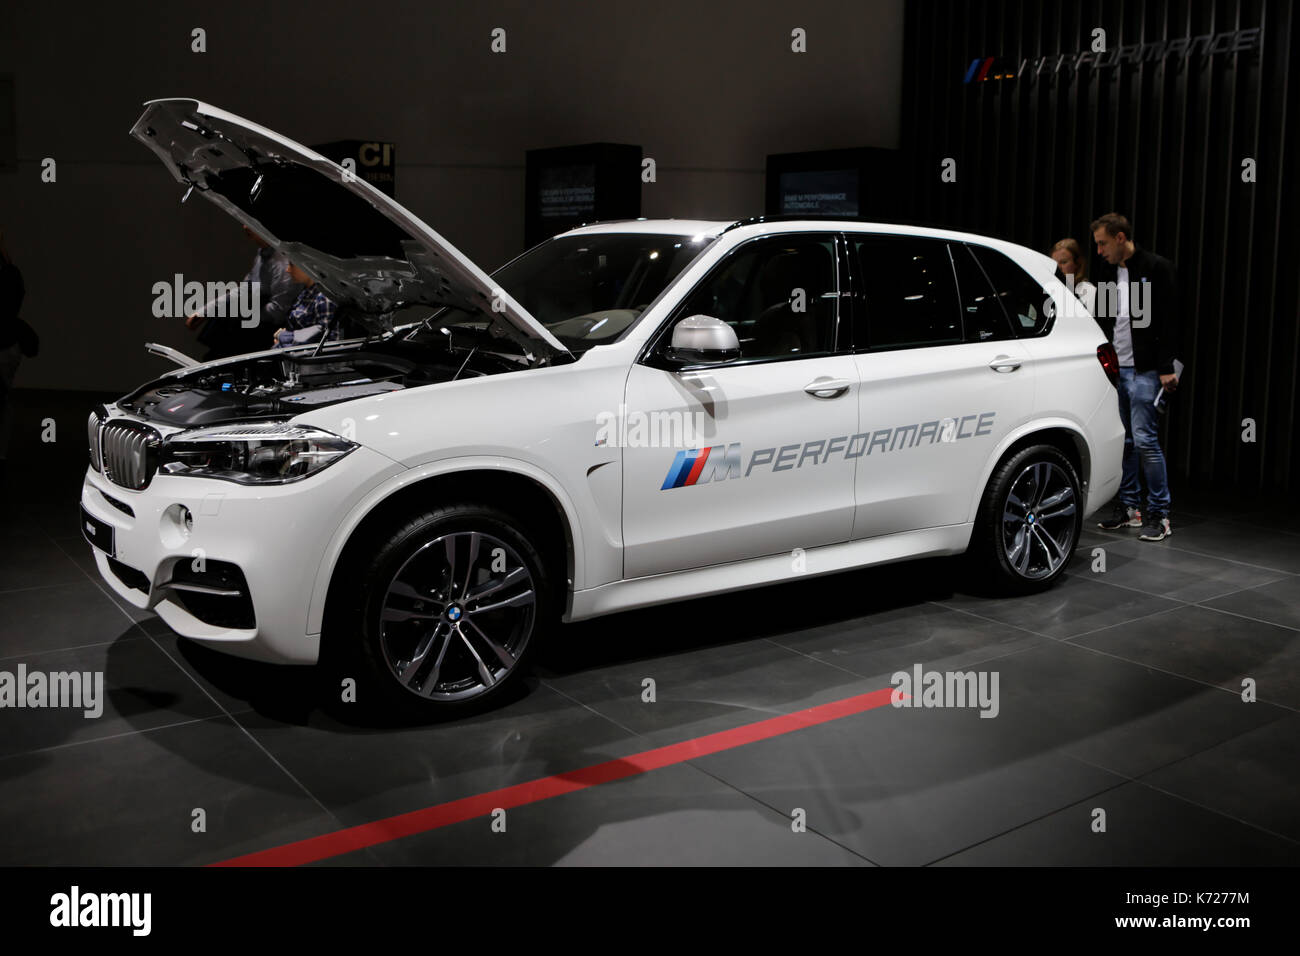 Frankfurt, Germany. 14th September 2017. The German car manufacturer BMW presented the BMW X5 M50d at the 67. IAA. The 67. Internationale Automobil-Ausstellung (IAA) opened in Frankfurt for trade visitors. It is with over 1000 exhibitors one of the largest Motor Shows in the world. The show will open for the general public on the 16th September. Stock Photo